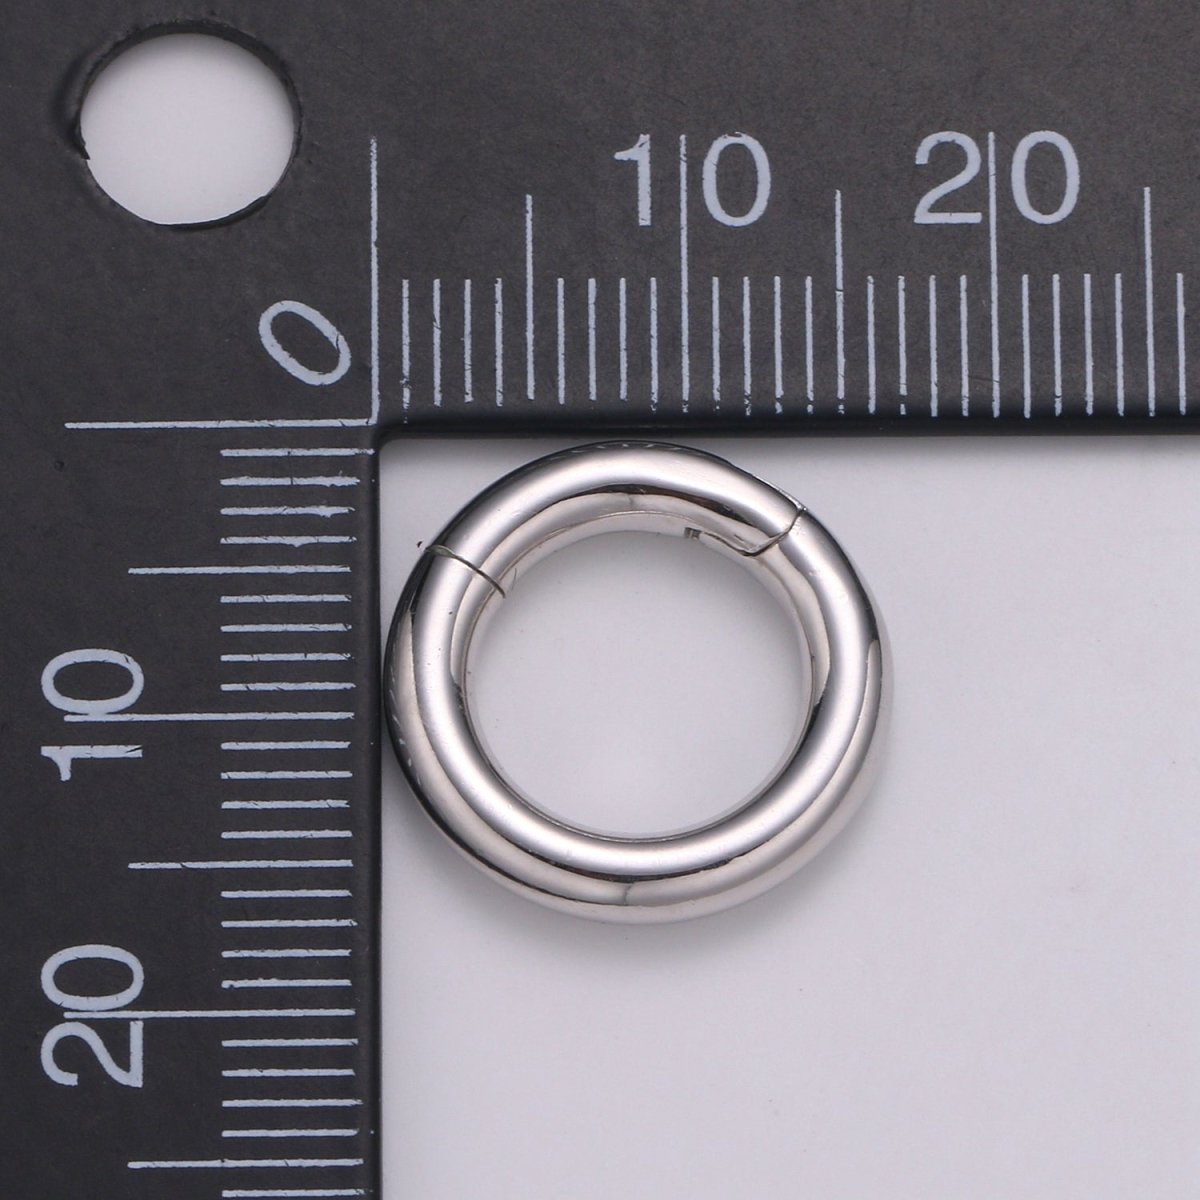 925 Sterling Silver Spring Gate Ring, 16 mm Push Gate ring, Charm Holder Clasp for Connector, Wristlet Holder SL-227 - DLUXCA